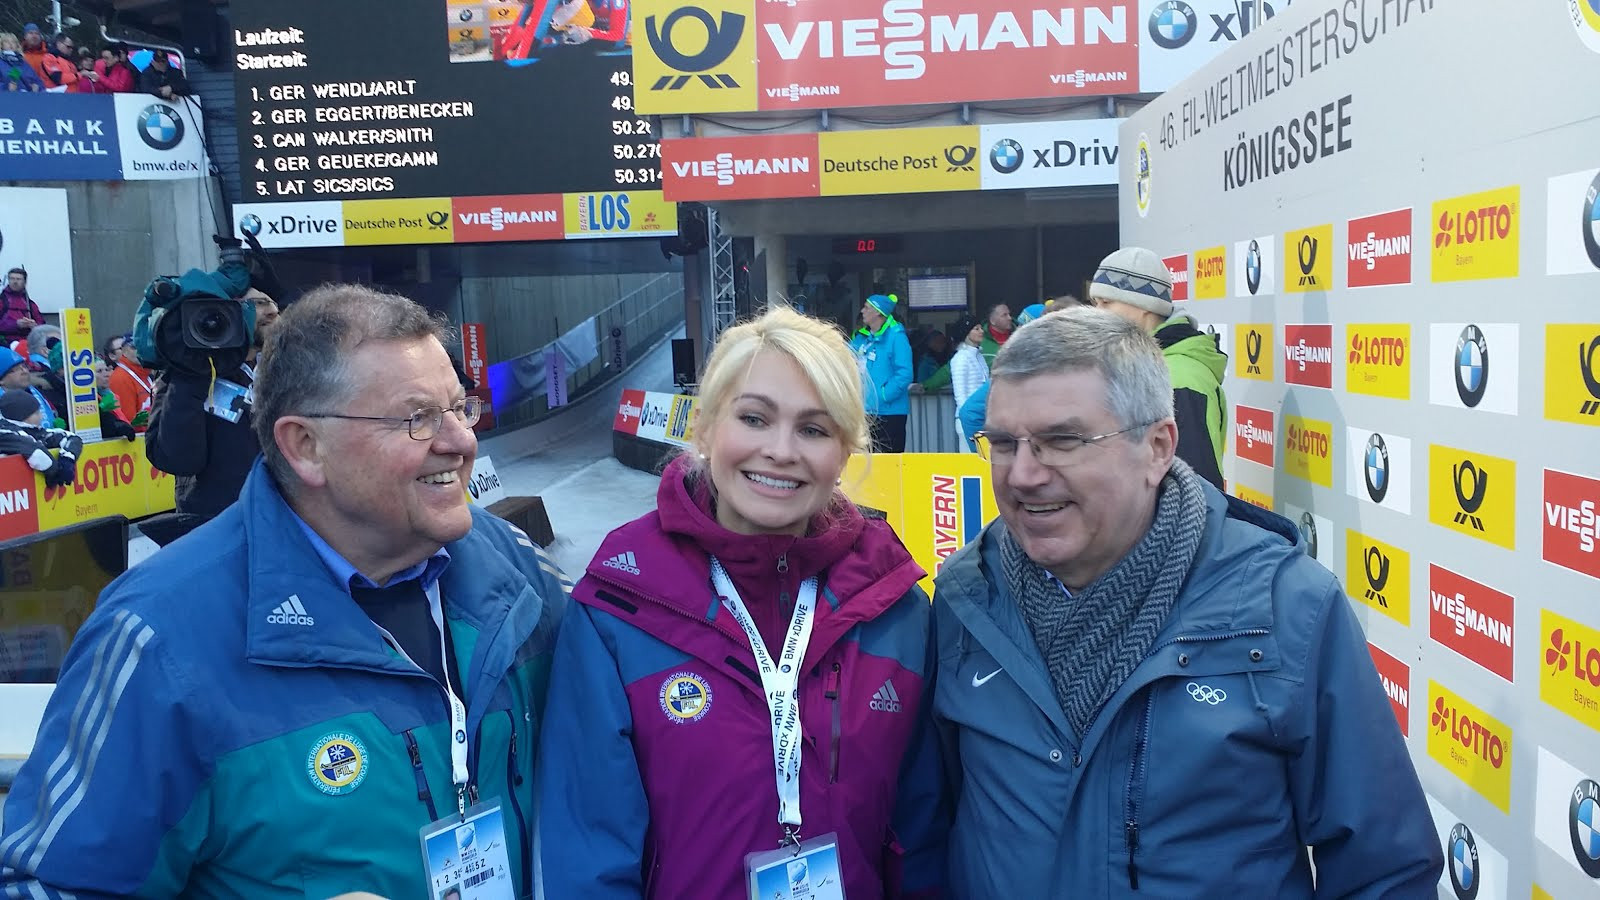 Natalia Gart, centre, head of the Russian Luge Federation, pictured with IOC President Thomas Bach, revealed Tatyana Ivanova and Albert Demchenko could appeal to CAS after FIL refused to sanction them ©IOC